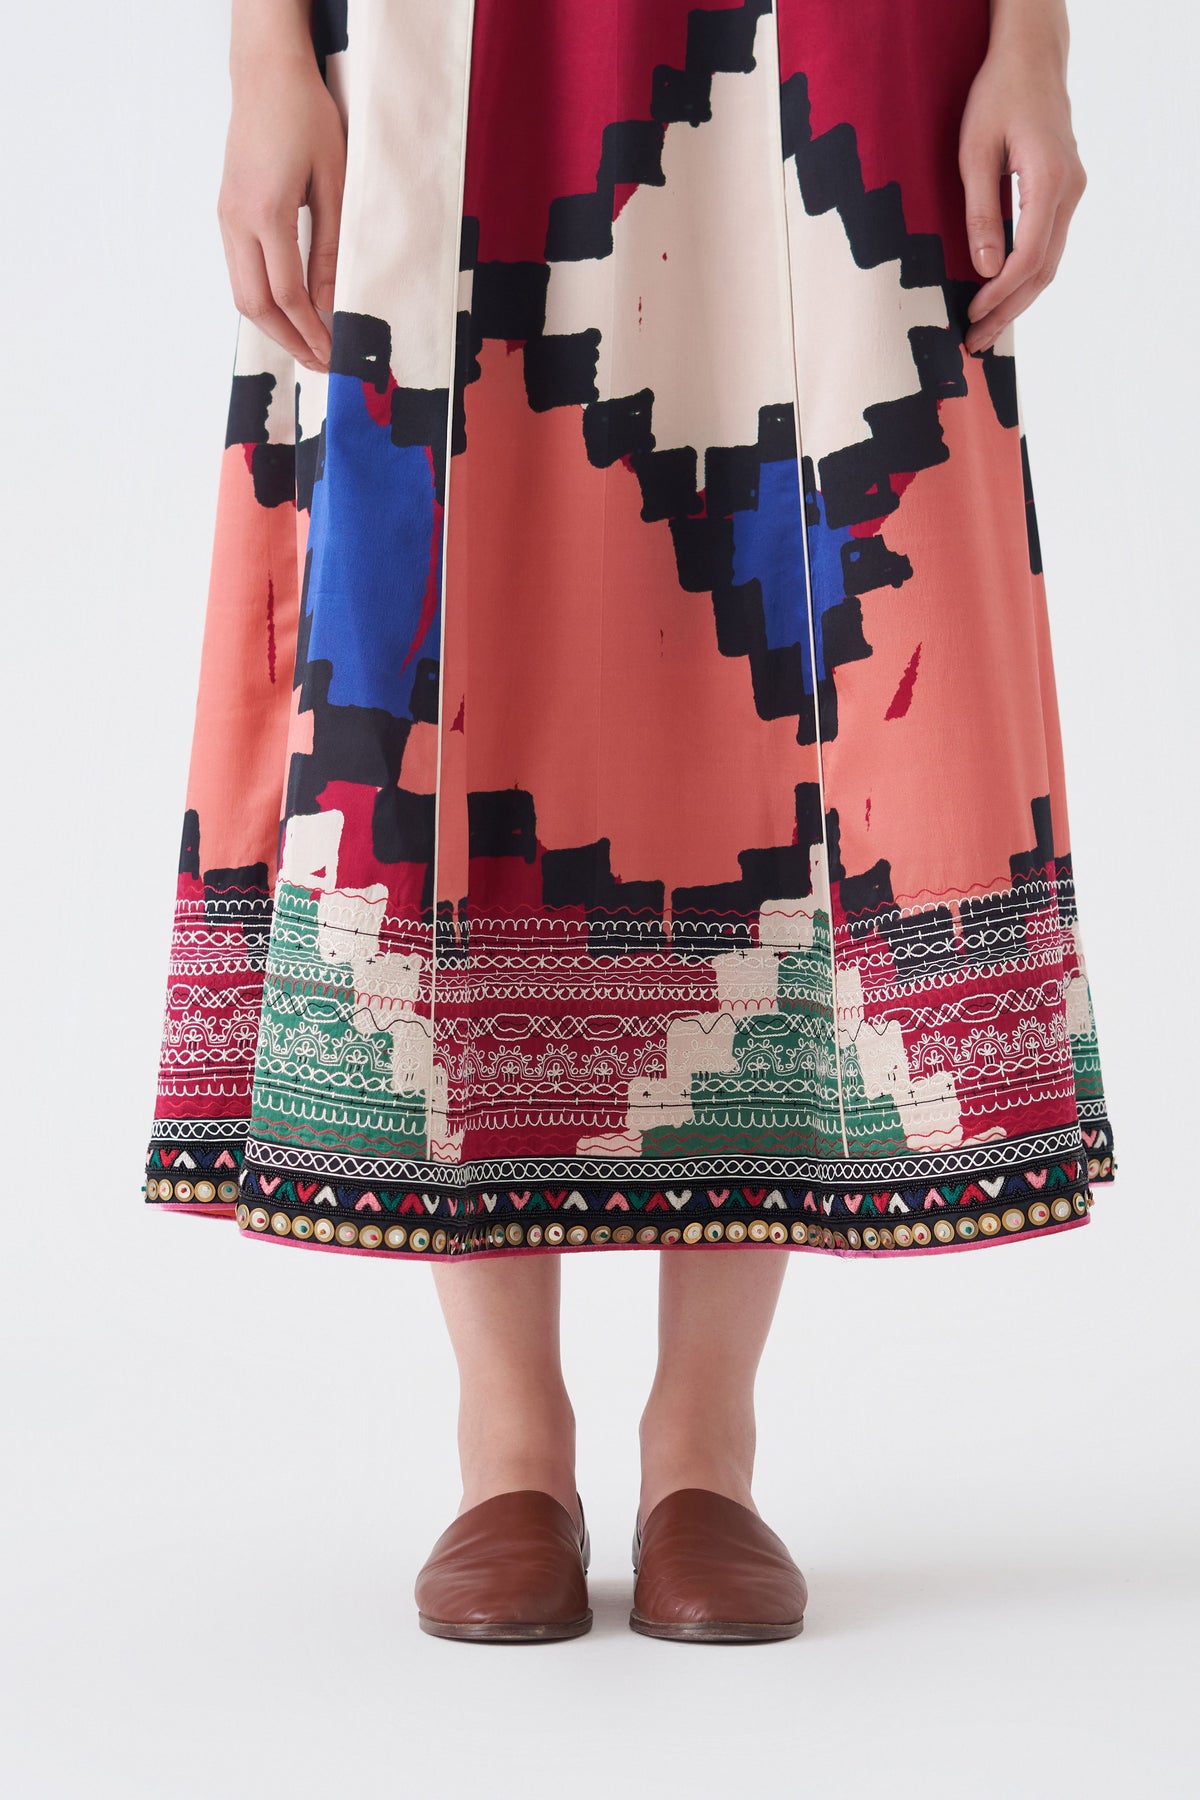 Print and Embroidered Toluca Skirt